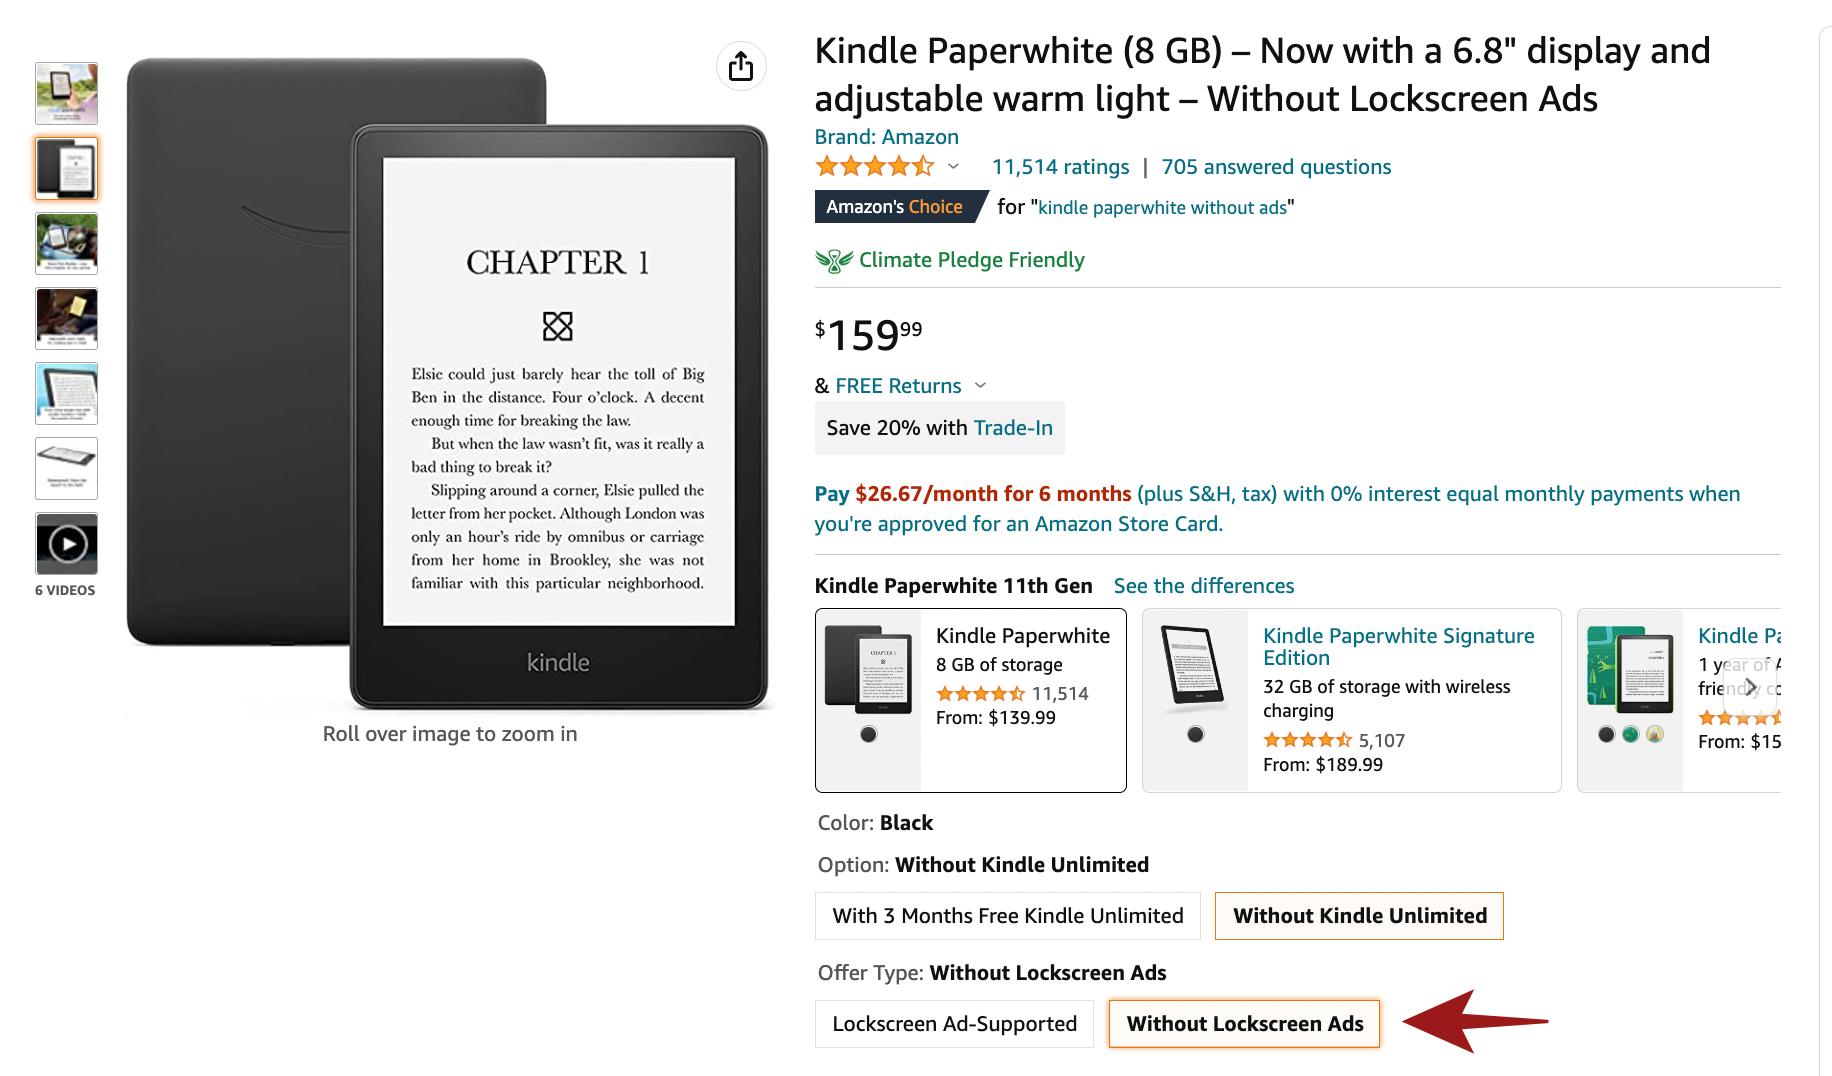 How to get ad supported kindle vs no ads?